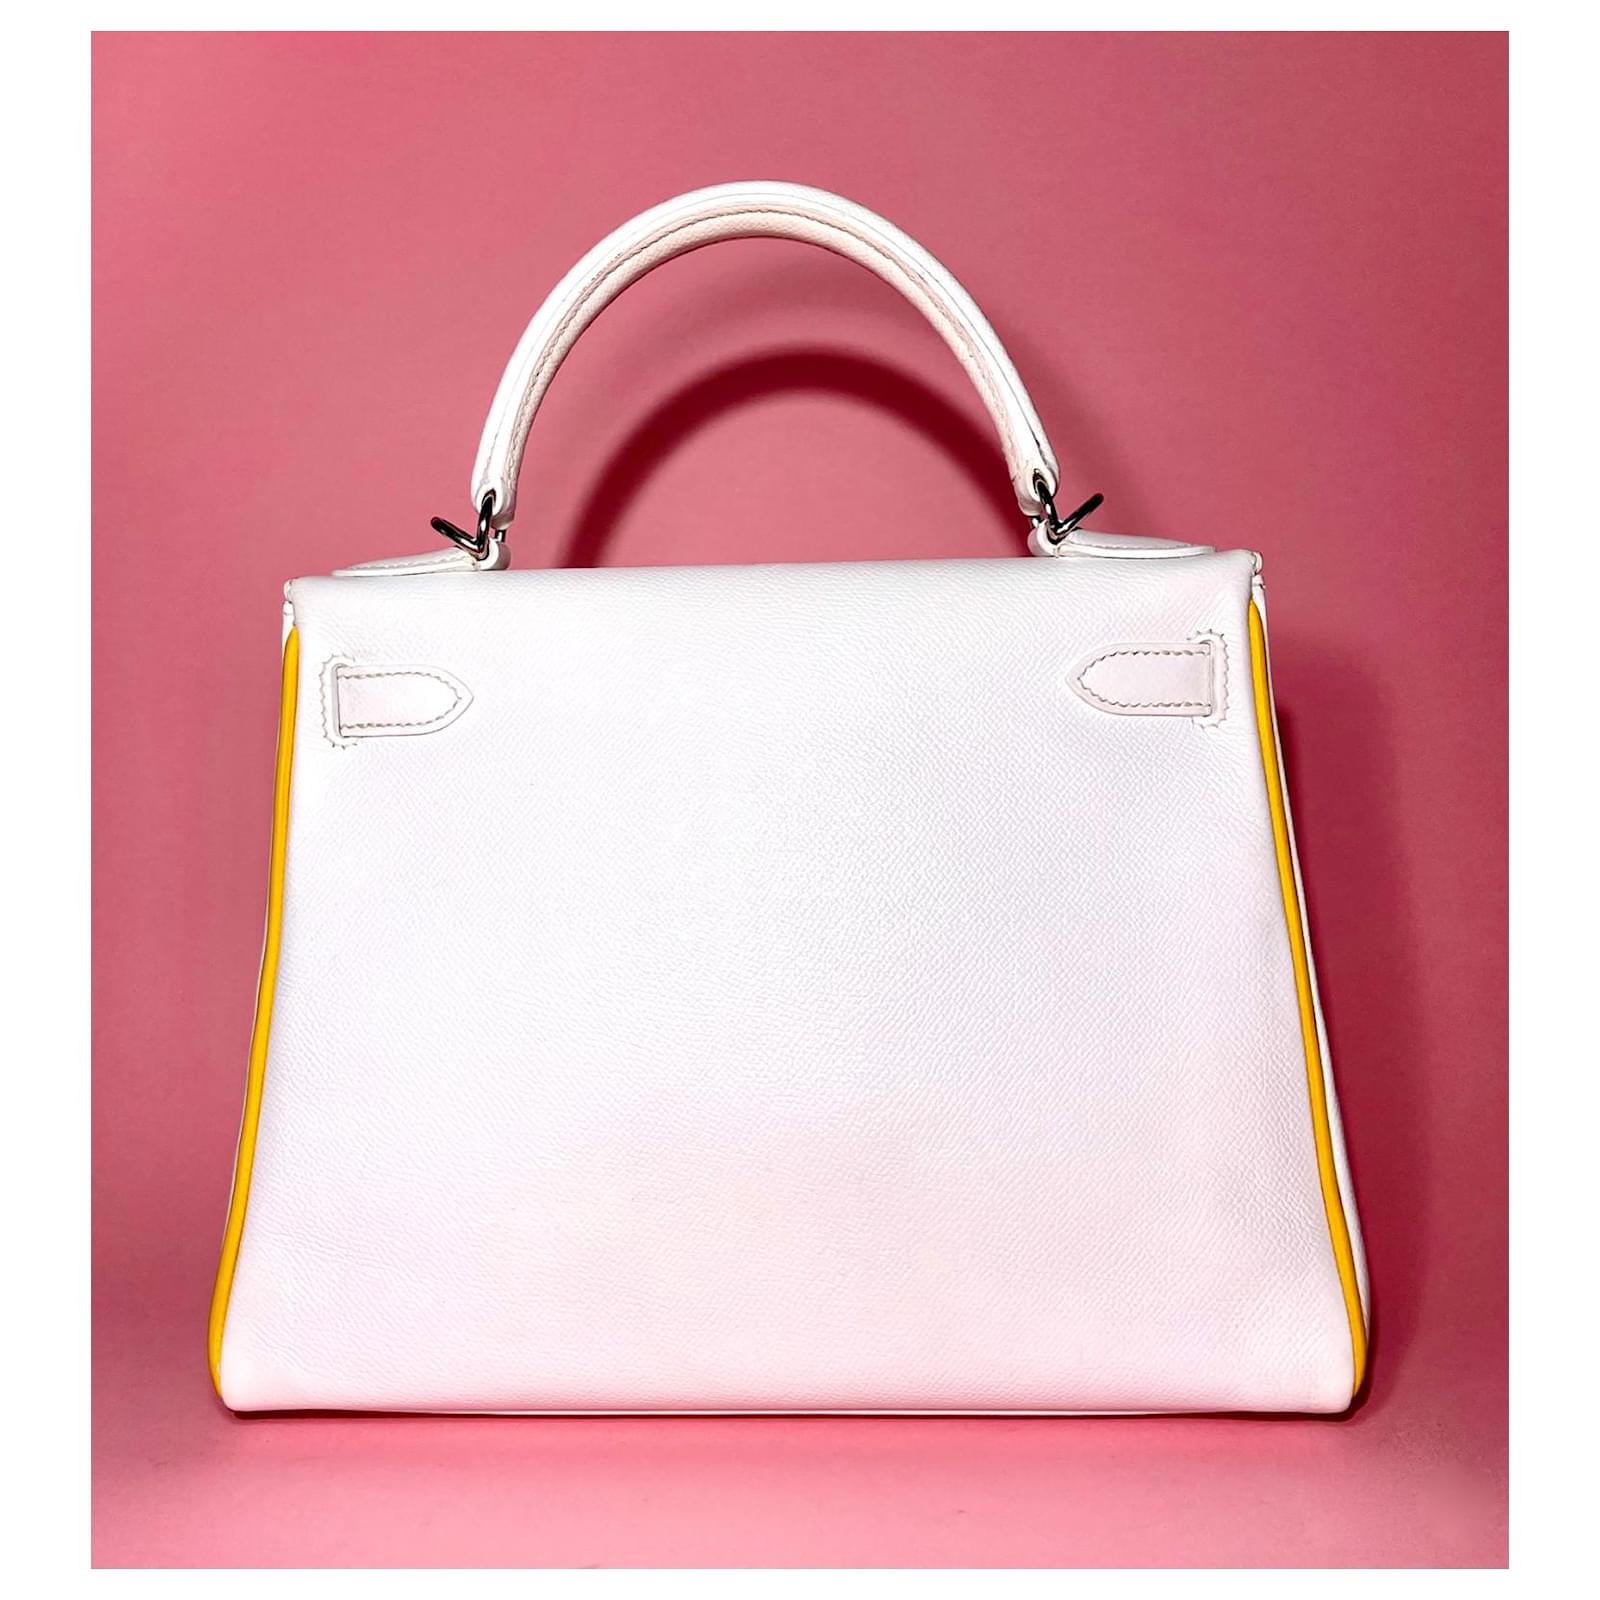 Preowned Hermes Kelly Danse White Super Rare Wear It 7 Ways Janefinds